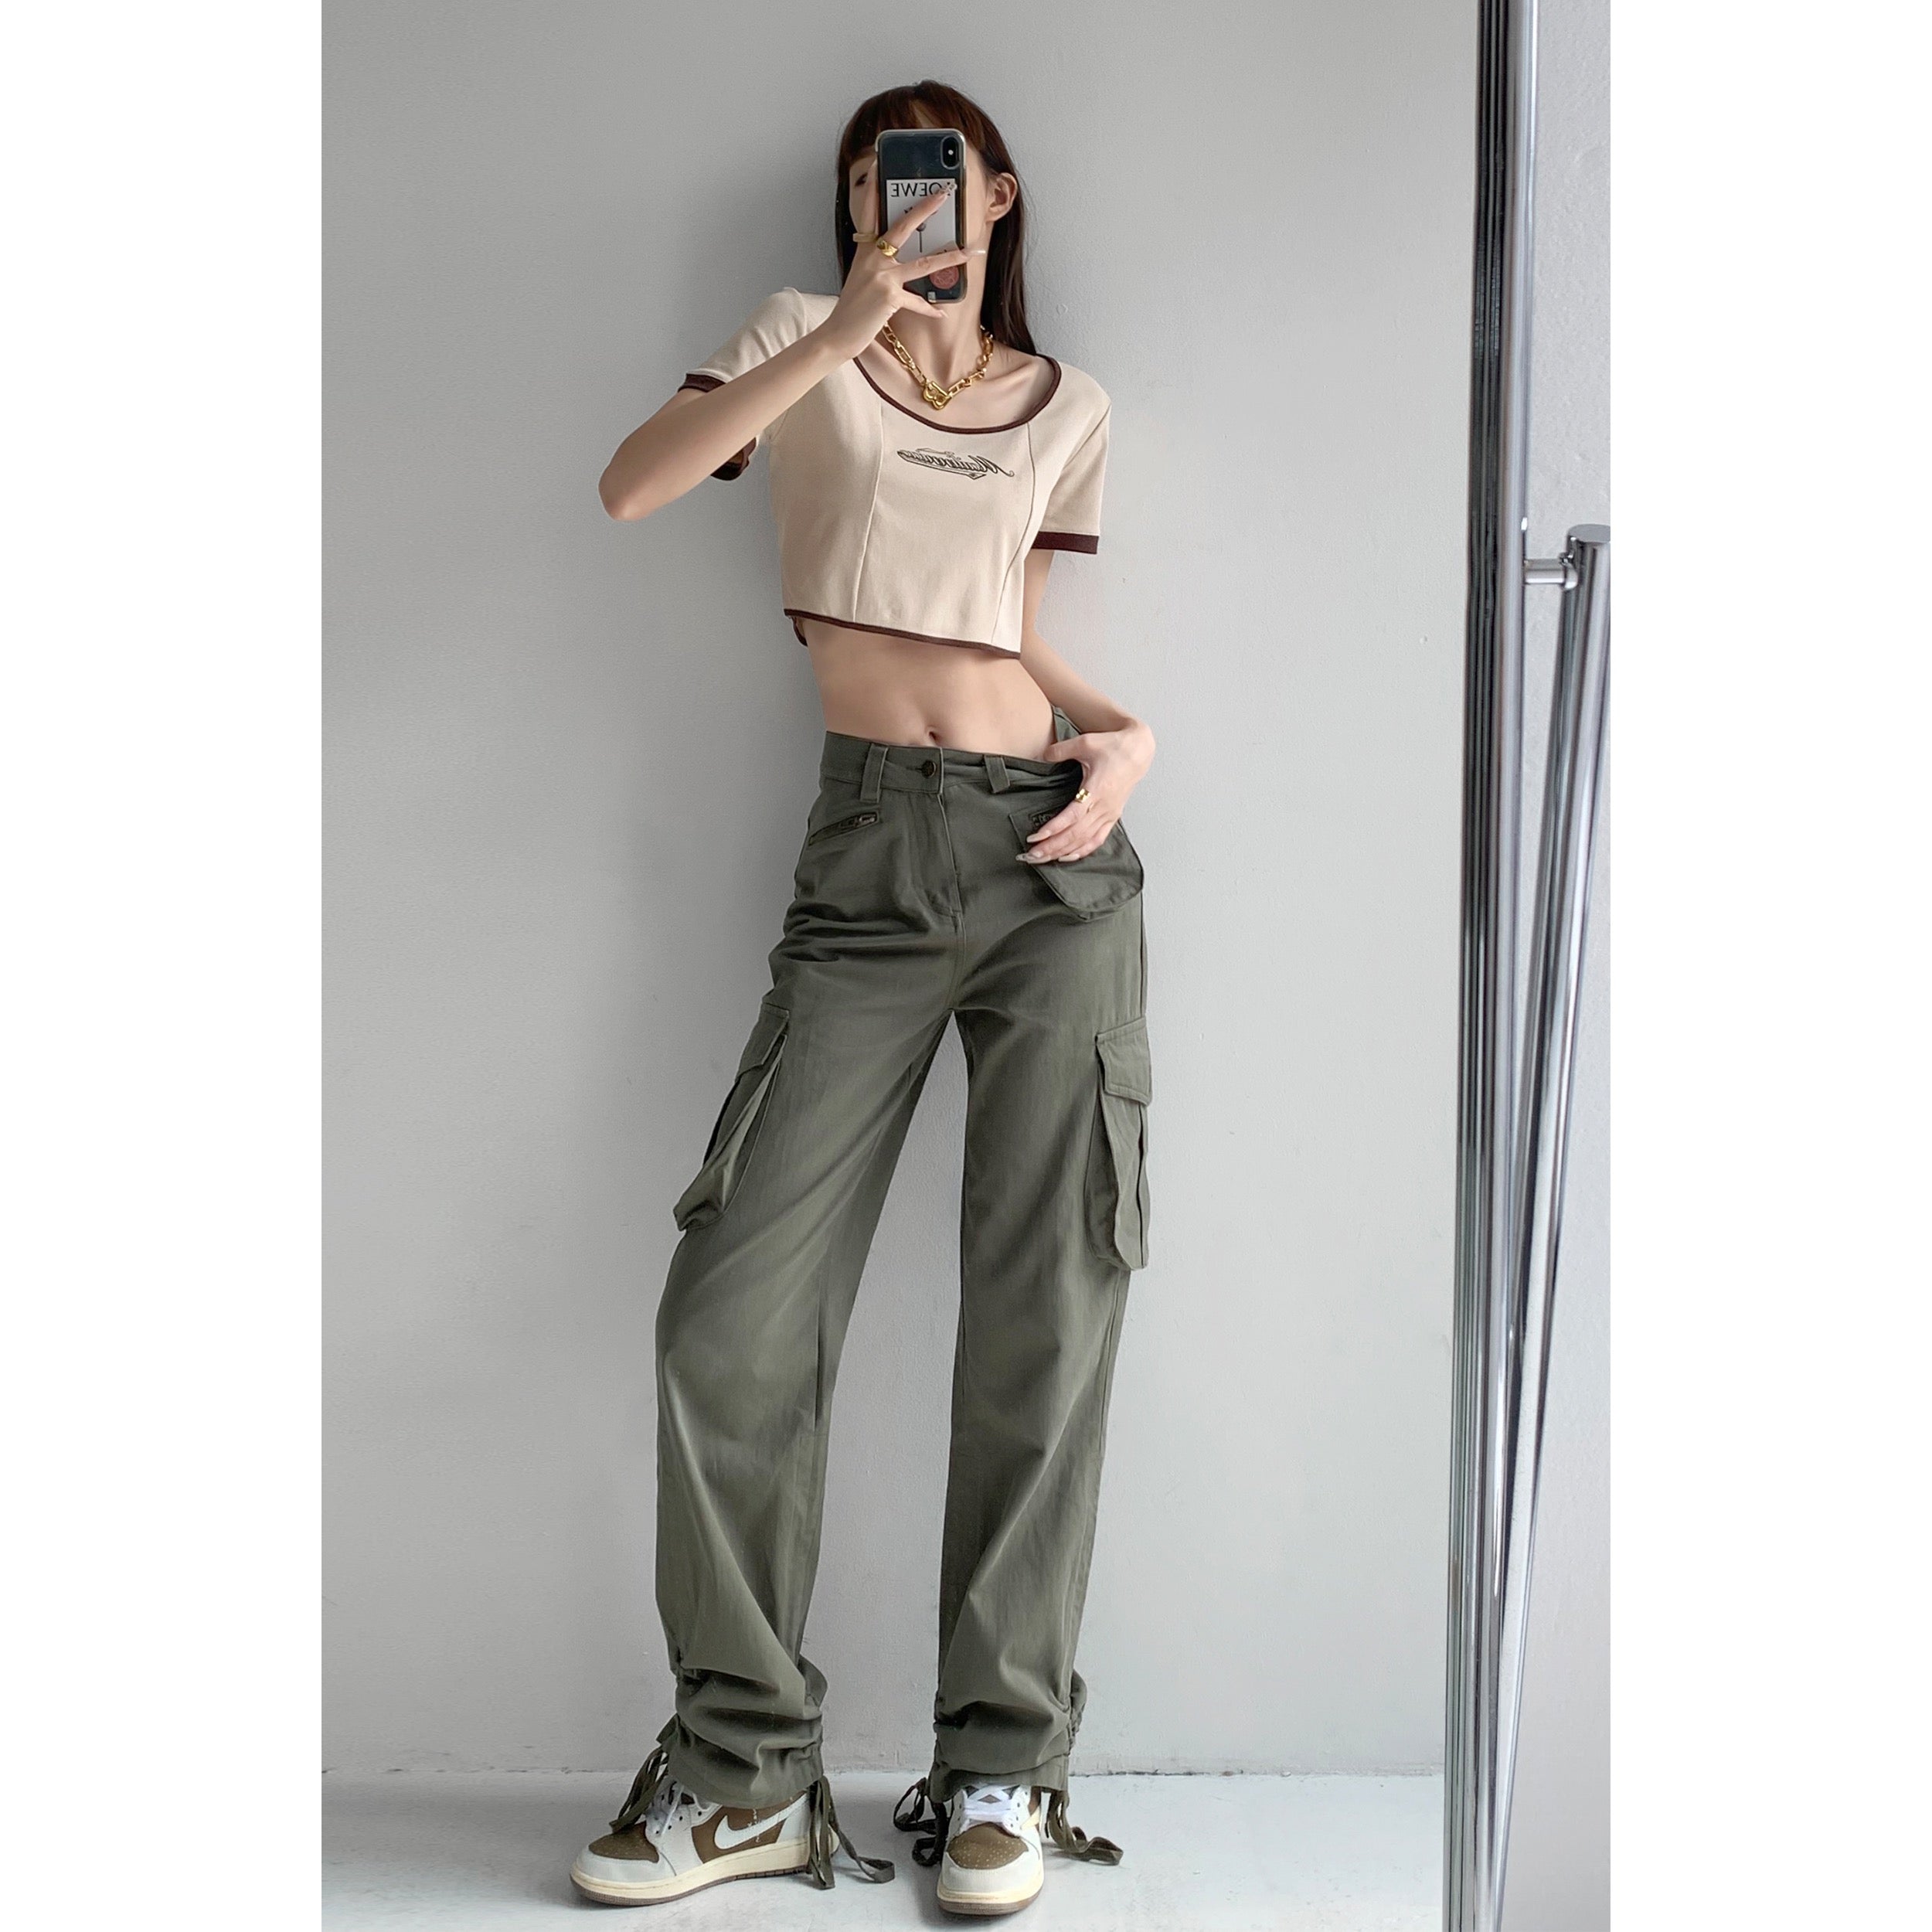 American style functional style multi-pocket high-waisted sports